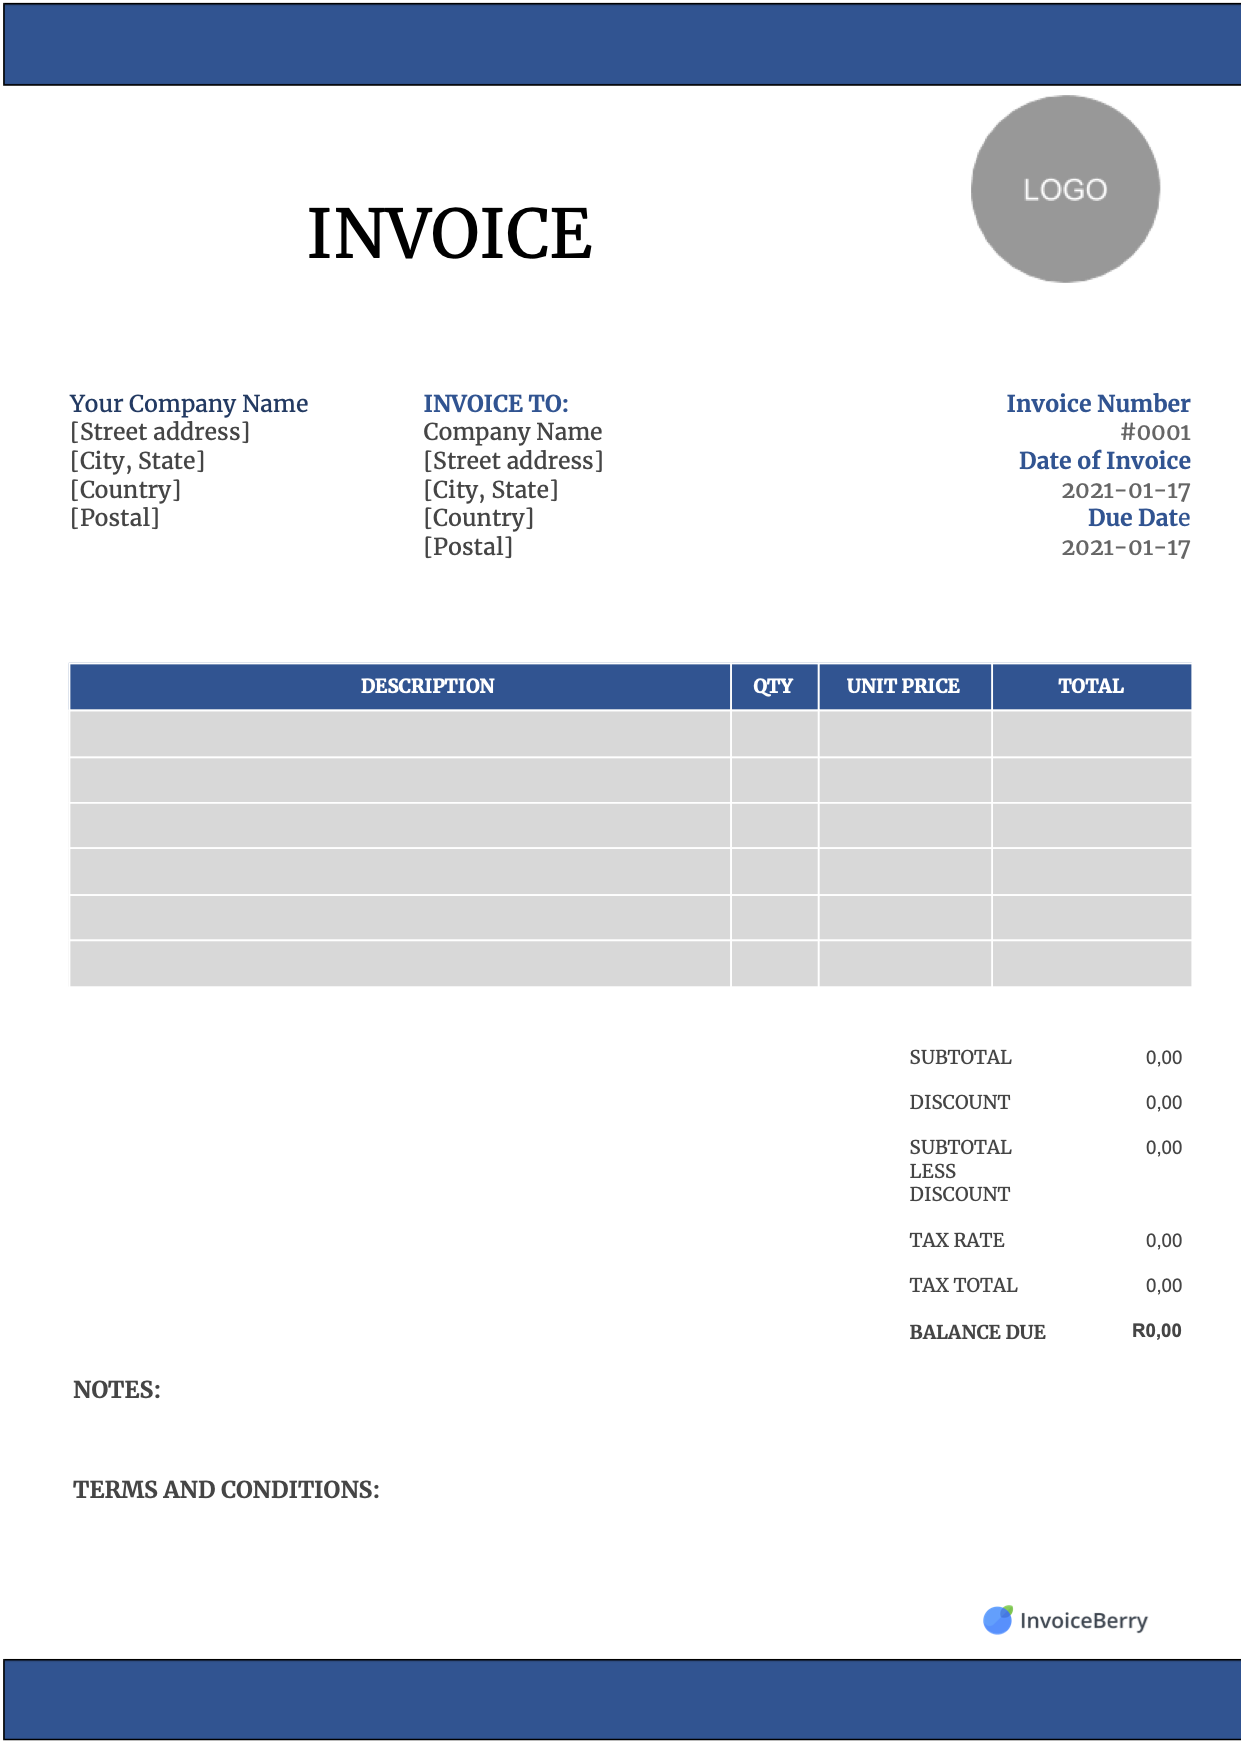 Free Invoice Templates Download - All Formats and Industries Within Invoice Template Filetype Doc